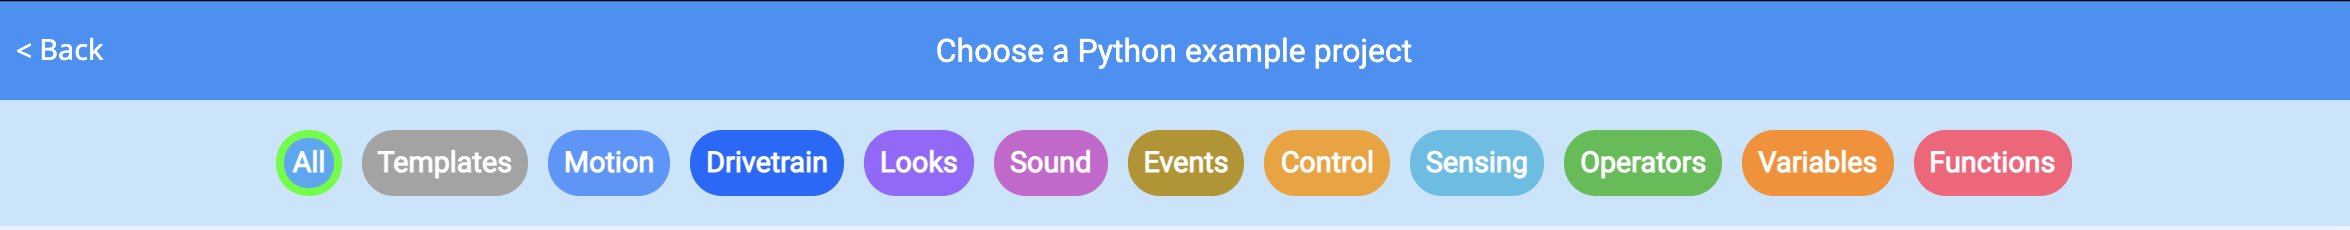 select_python_example_project.png